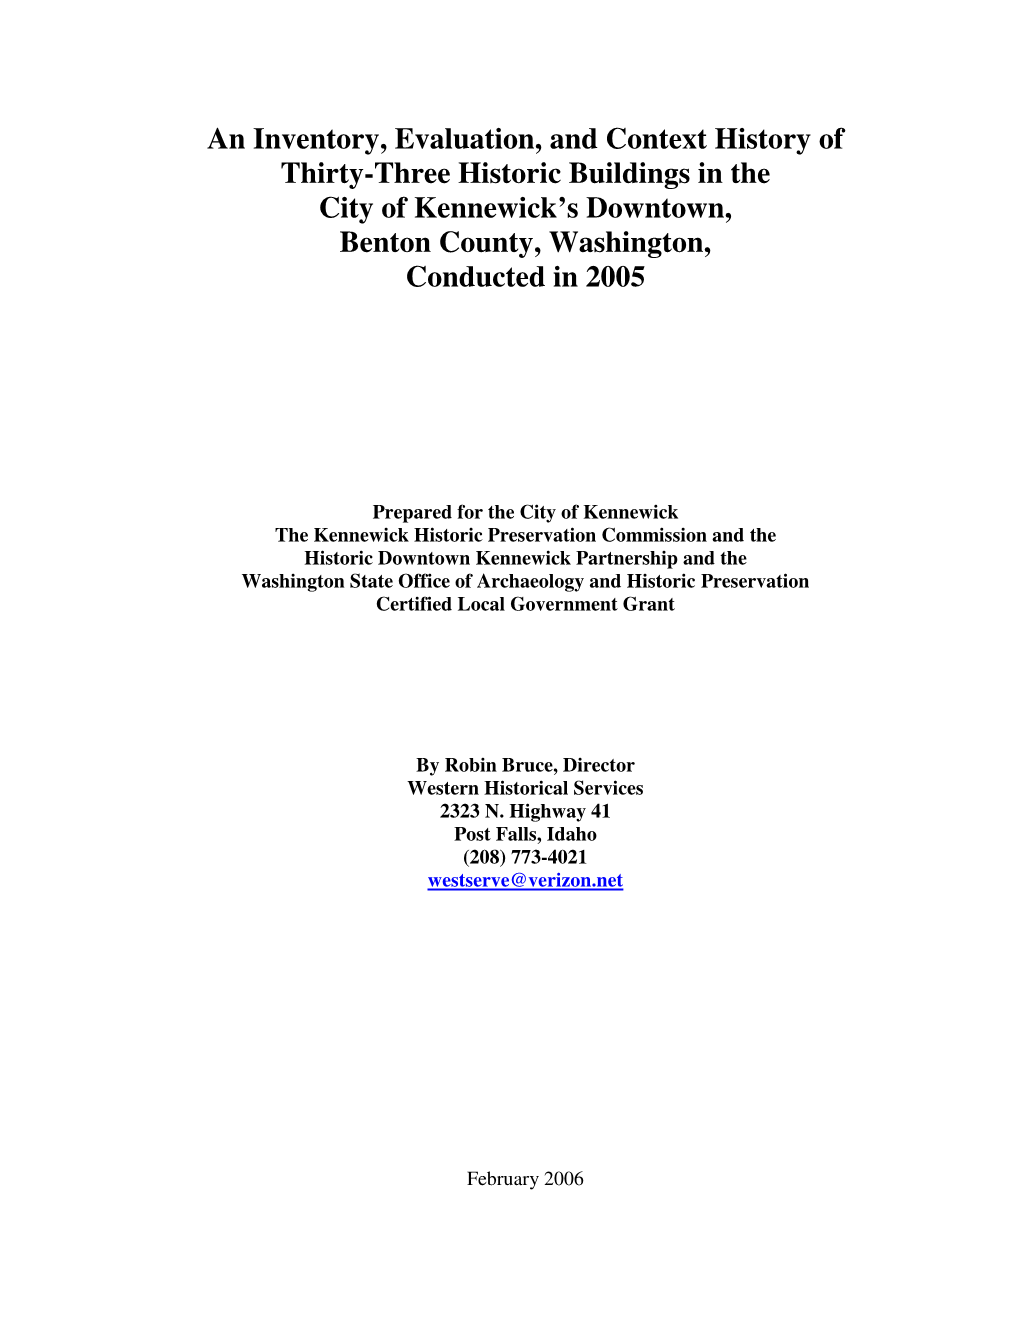 Inventory, Evaluation Context History of Historic Buildings